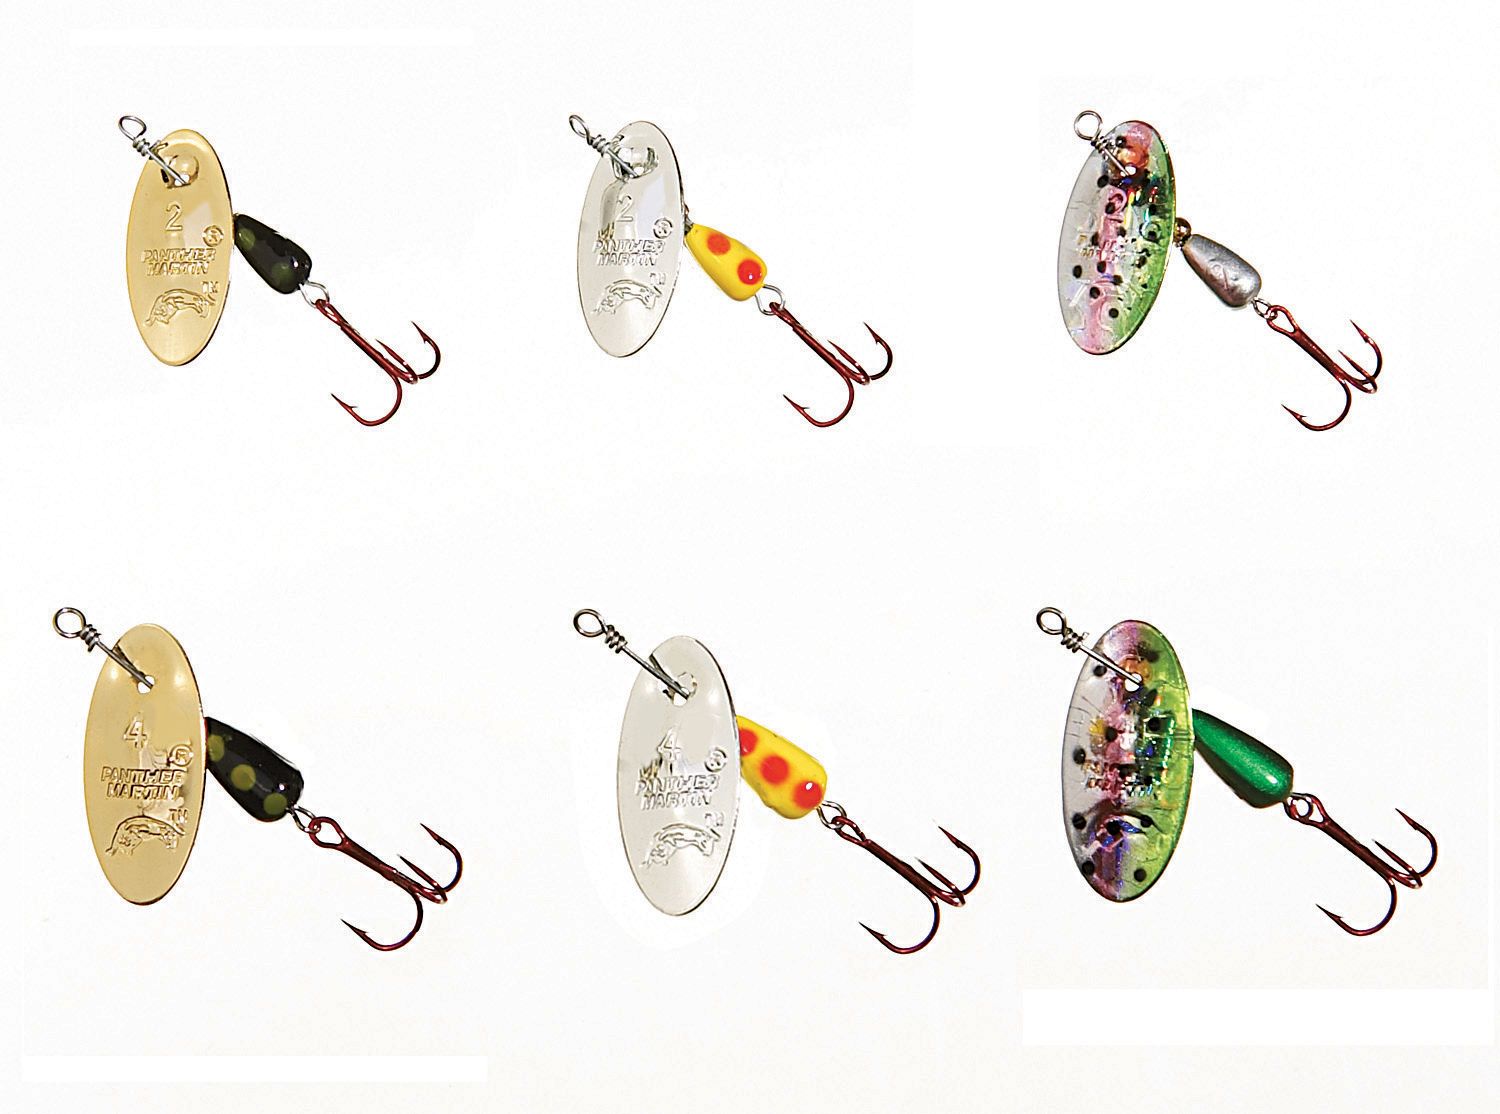 Panther Martin Classic Trout Kit – 6-Pack